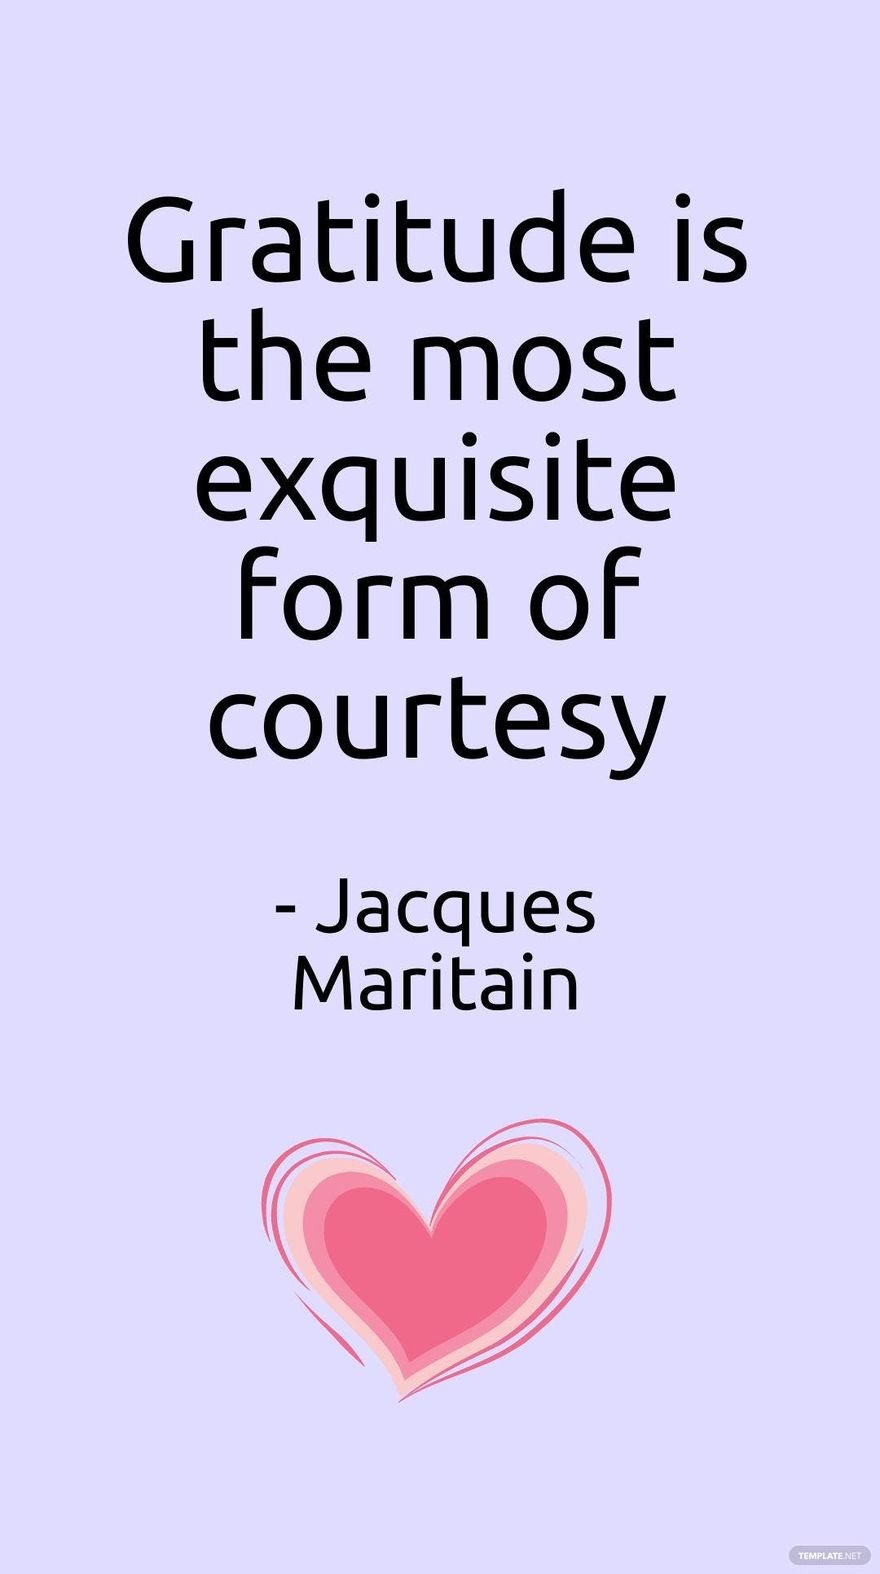 Jacques Maritain - Gratitude is the most exquisite form of